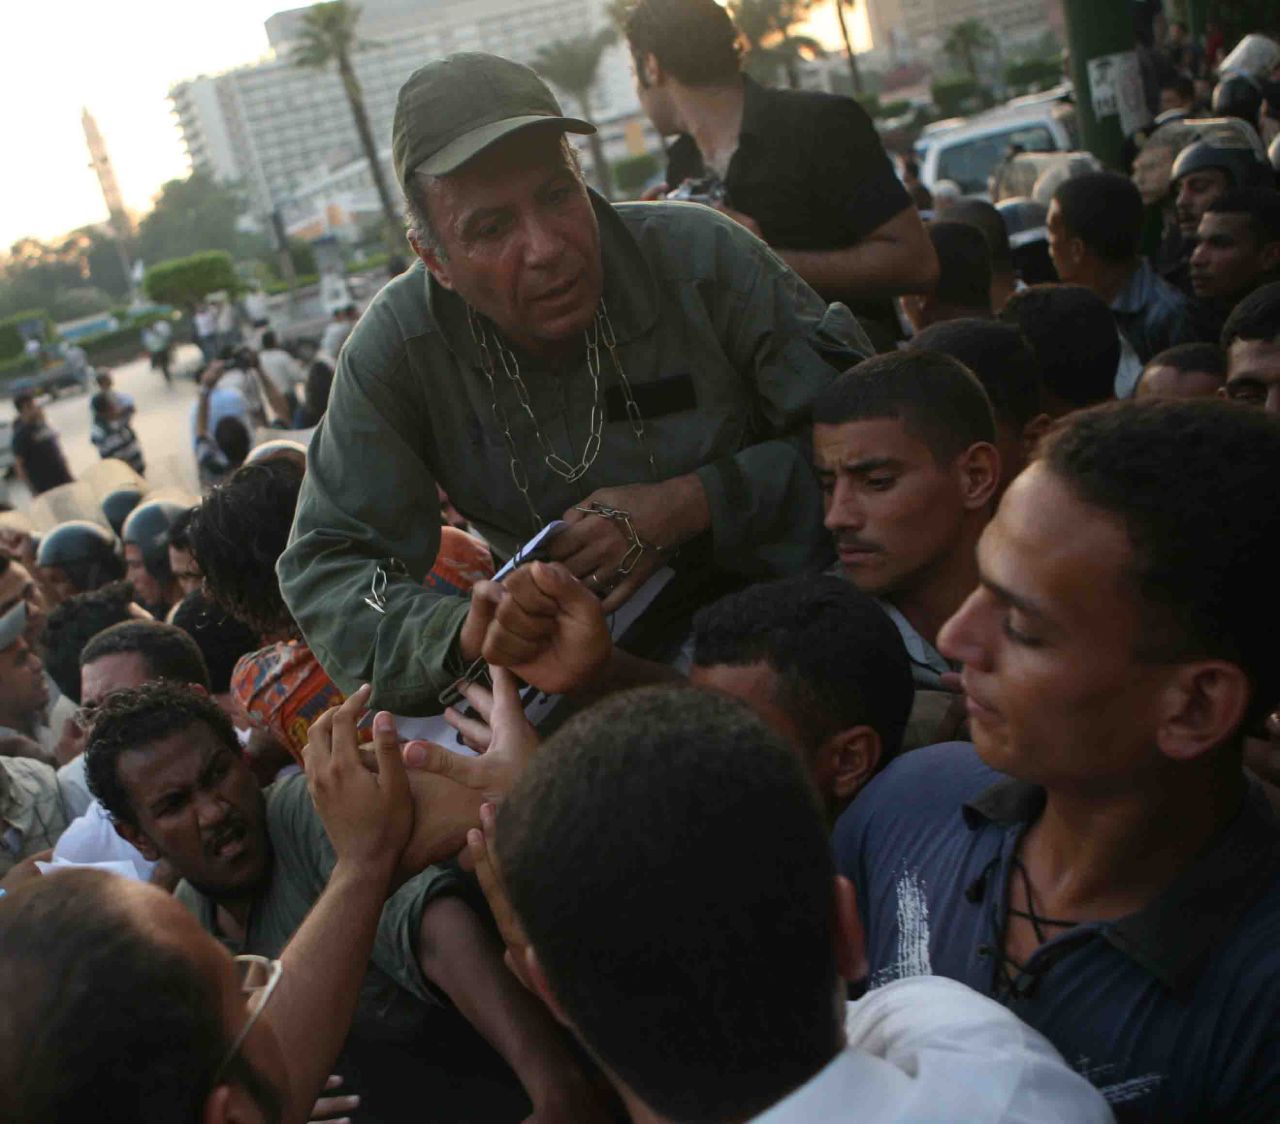 Kefaya activist Hamdi Qenawi dressed as an Egyptian army soldier in chains, mocking the Arab regimes' incapability of military action against Israel (Photo by Amr Abdallah, 26 July 2006)